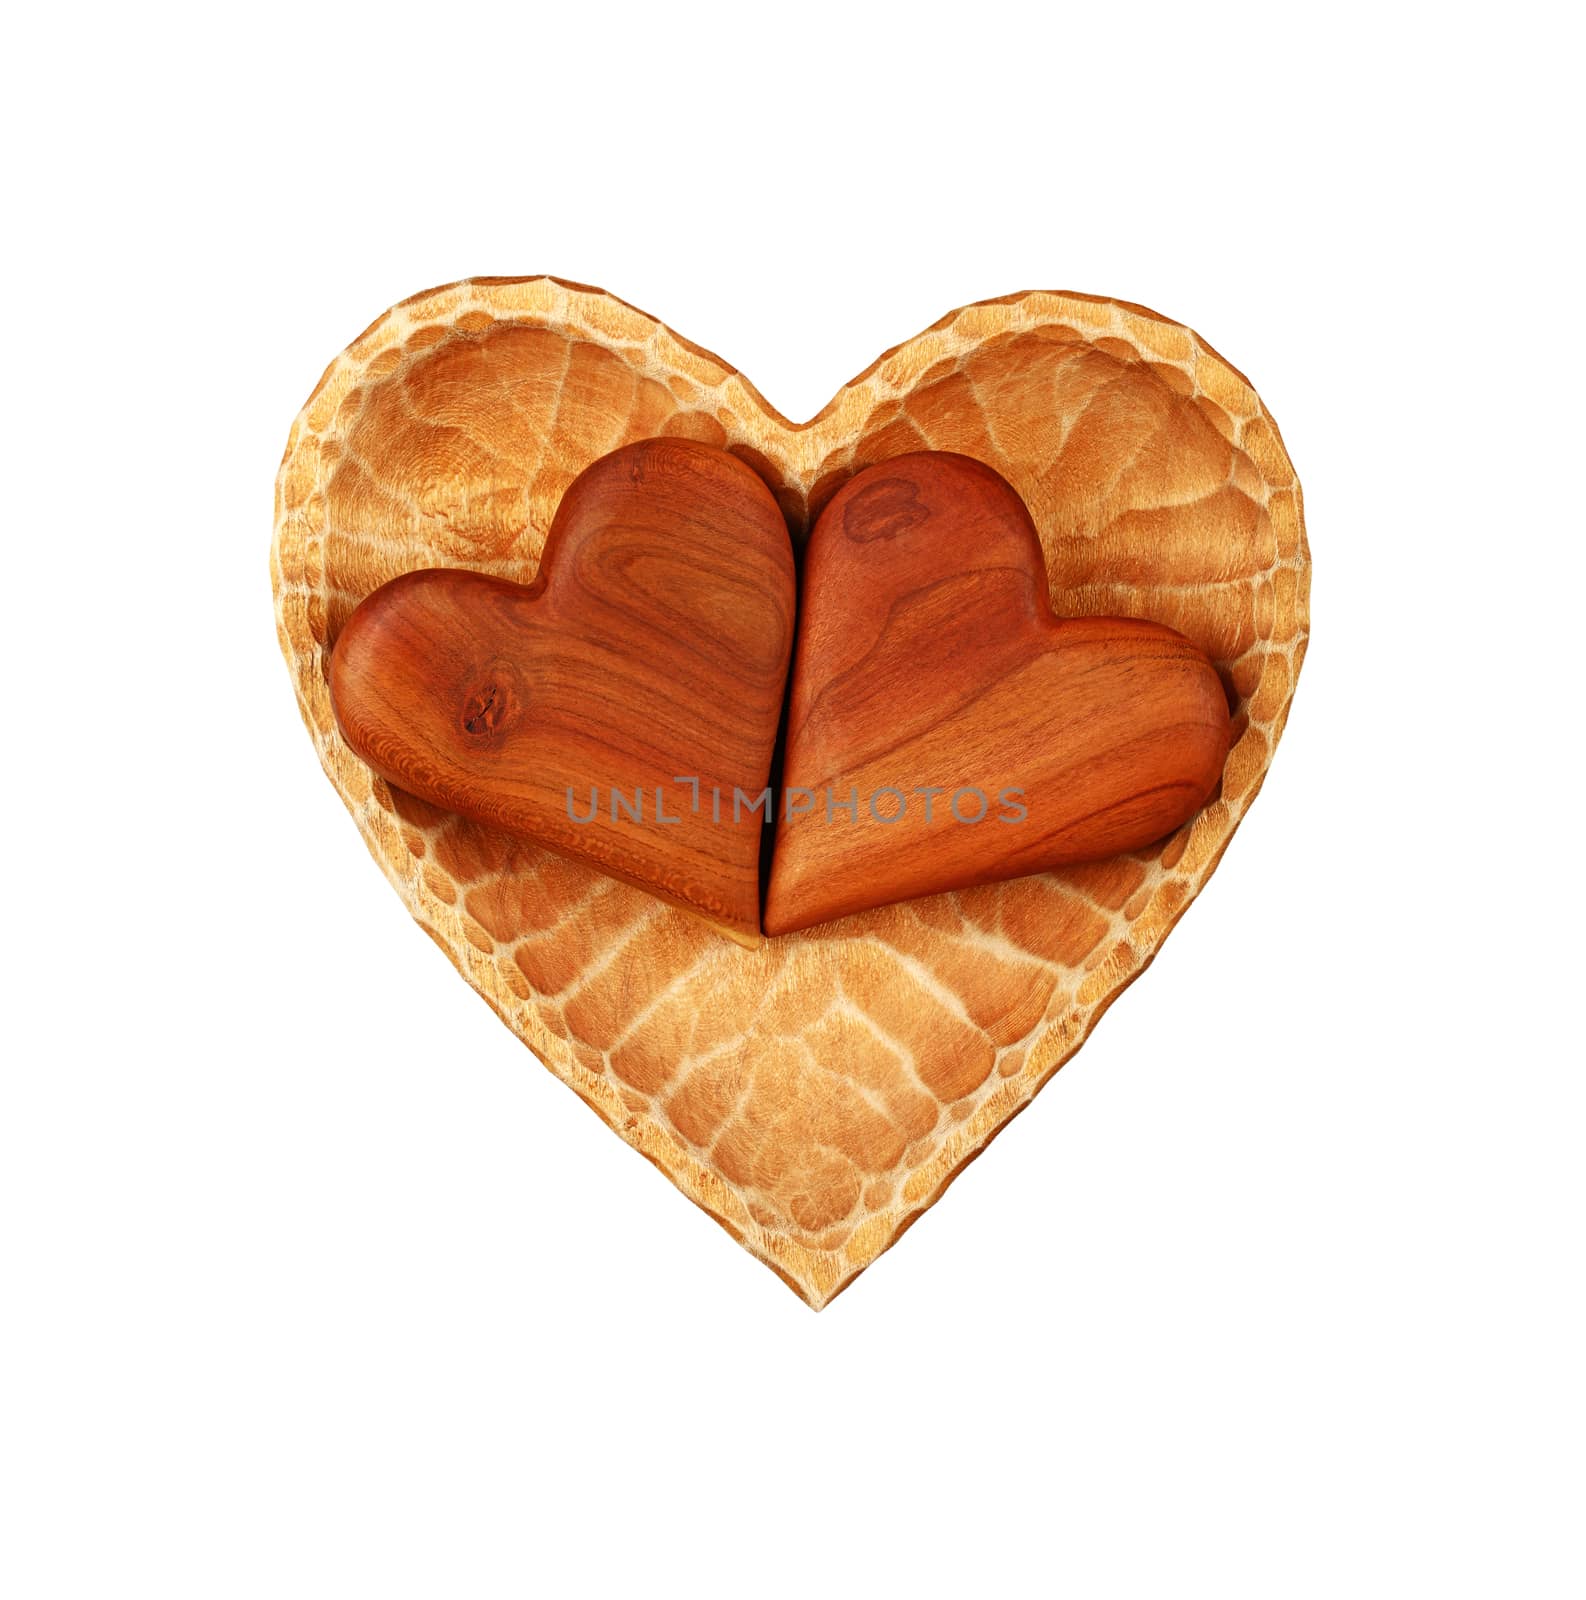 Close up two brown unpainted natural wooden carved hearts in heart shaped bowl isolated on white background